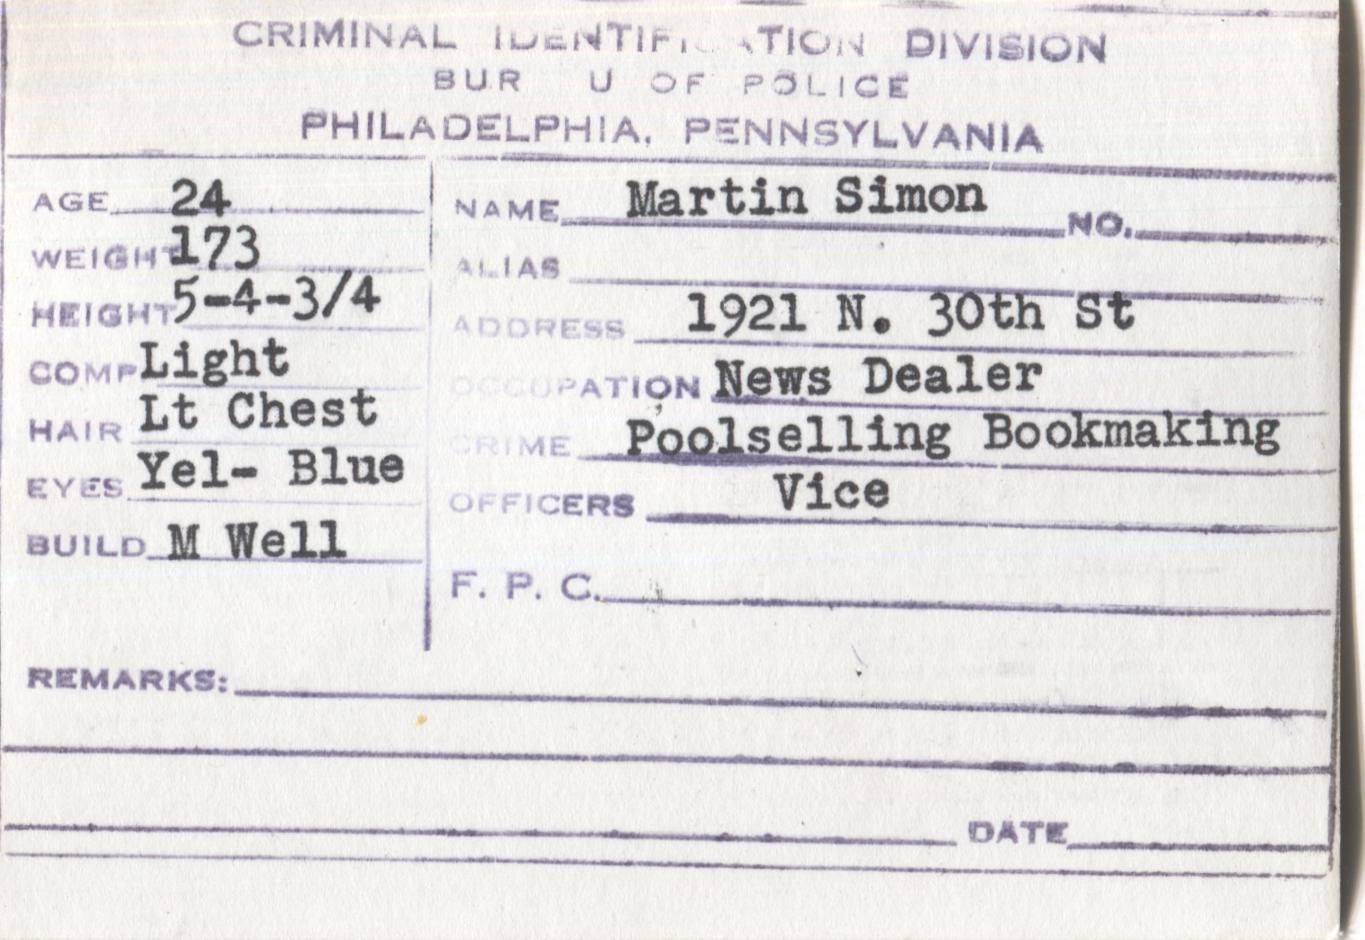 Martin Simon Mugshot - Arrested on 5/19/1947 for Poolselling & Bookmaking